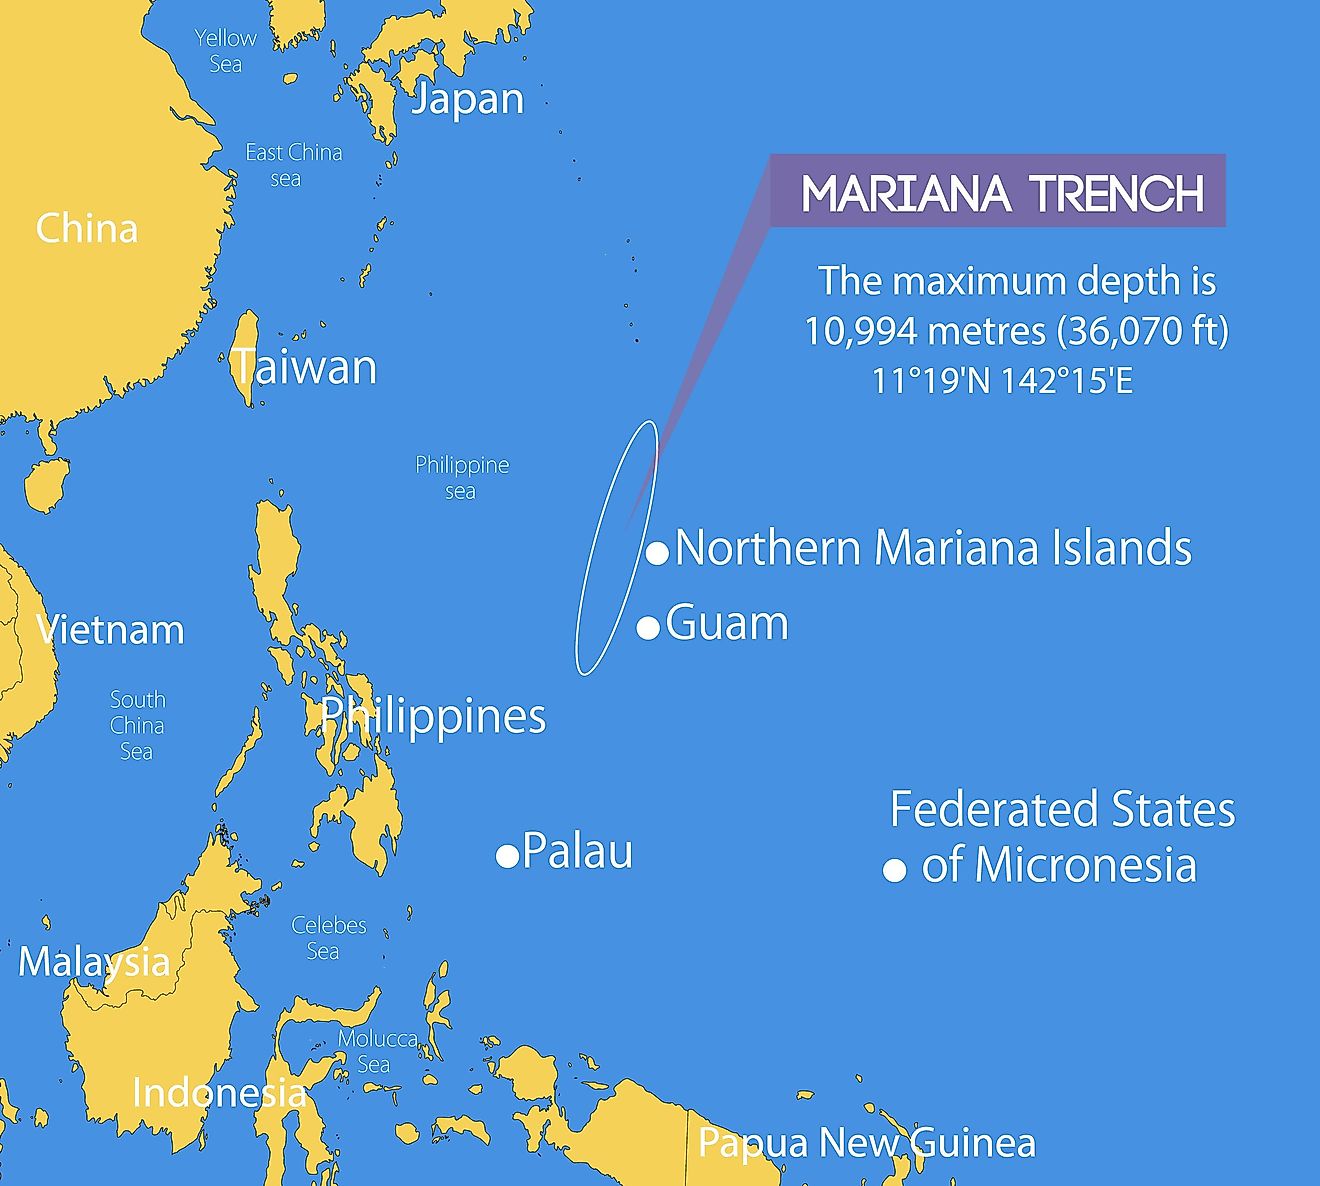 The Mariana Trench is so vast, and the pressure there is so strong that there have been only four expeditions that went there.